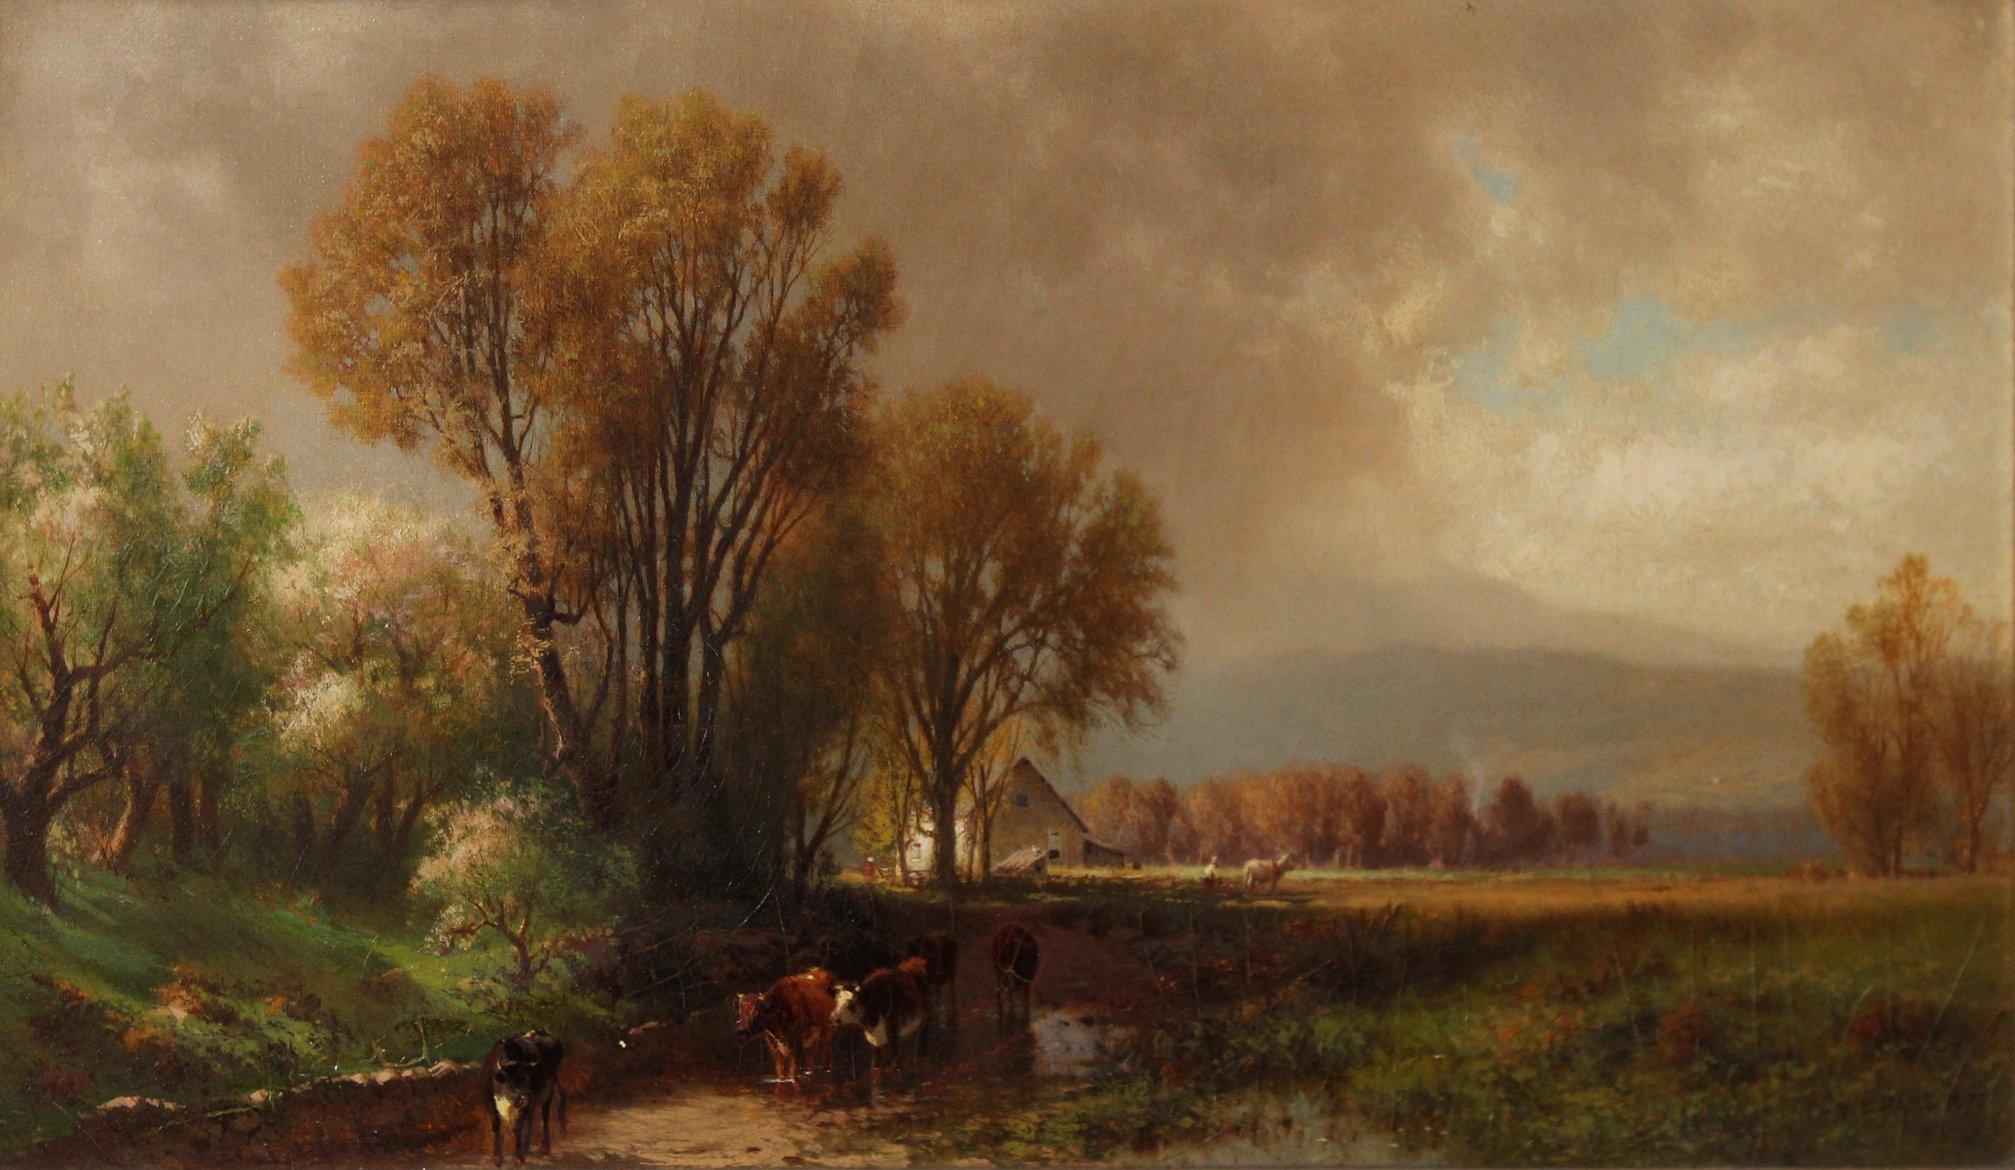 William Hart (1823 - 1894)
Keene Valley, Adirondack Landscape, New York, 1873
Oil on canvas
9 x 16 inches
Housed in an East Lake frame
Signed and dated lower right

Provenance:
Private Collection, Riverdale, Bronx, New York

Born in 1823 in Paisley,